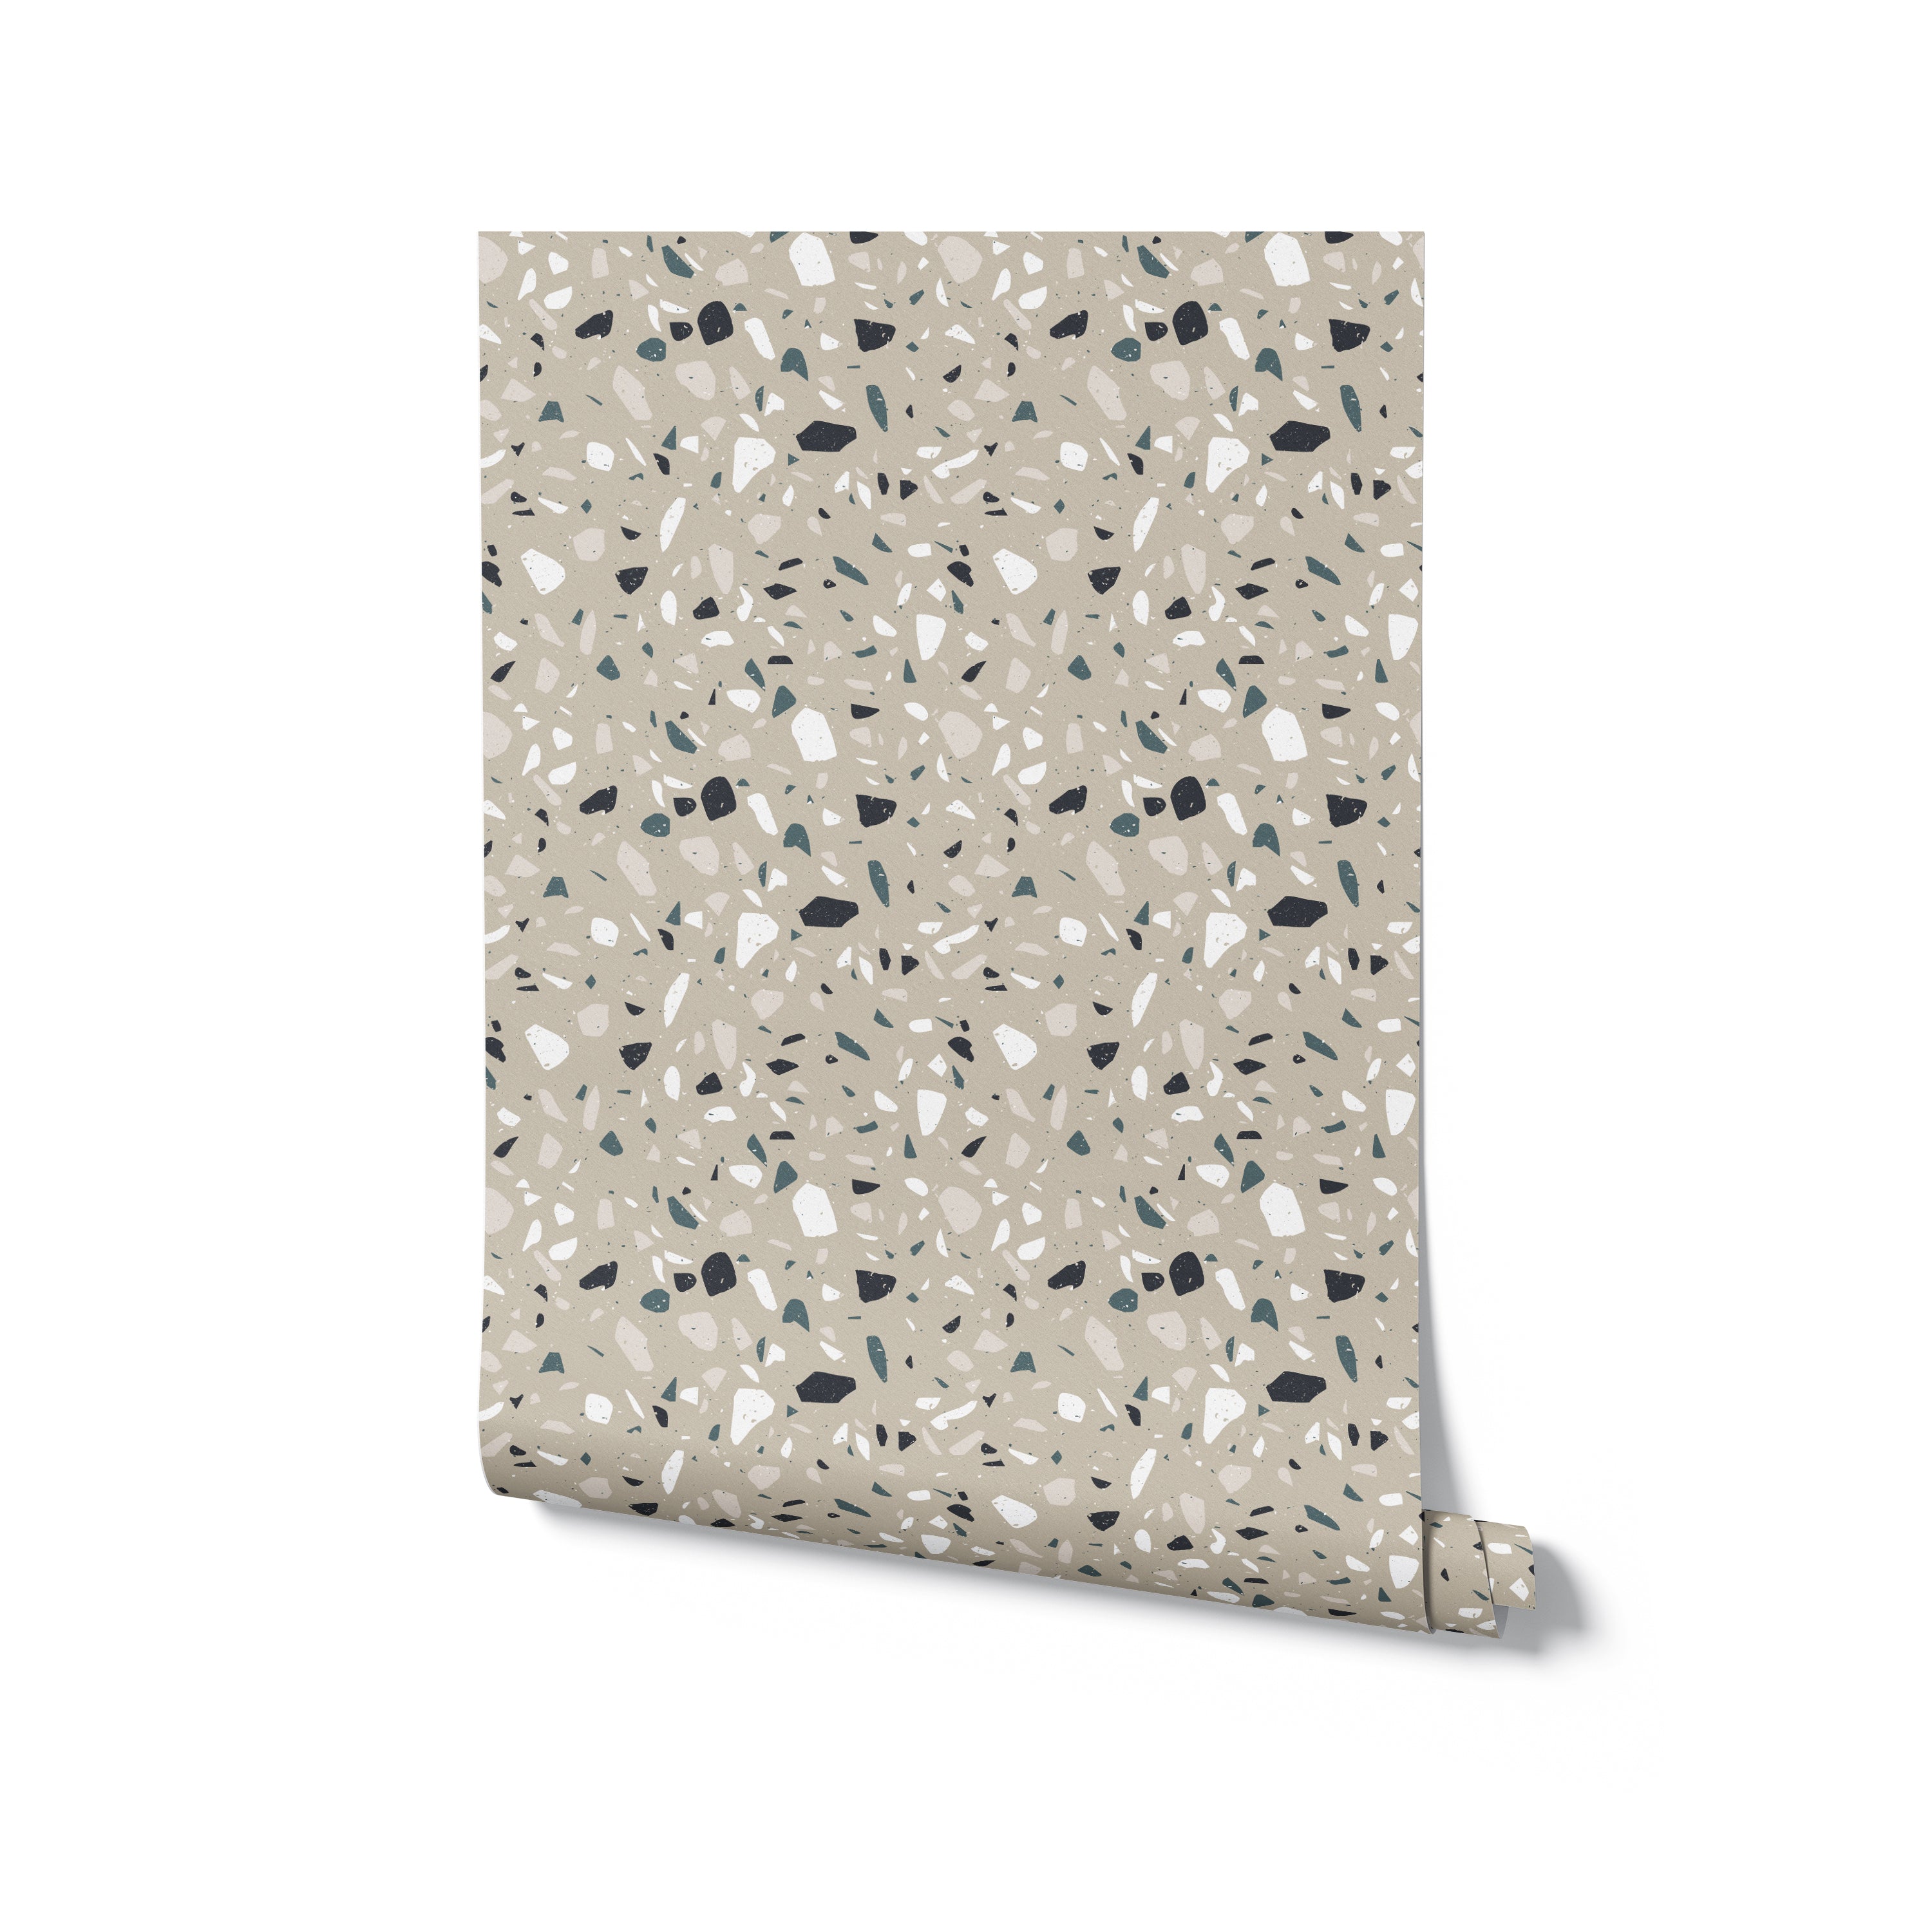 A roll of Earthen Terrazzo Wallpaper, partially unrolled to display the unique terrazzo pattern with a diverse mix of chip sizes and colors, ideal for adding a modern and artistic touch to any room's decor.